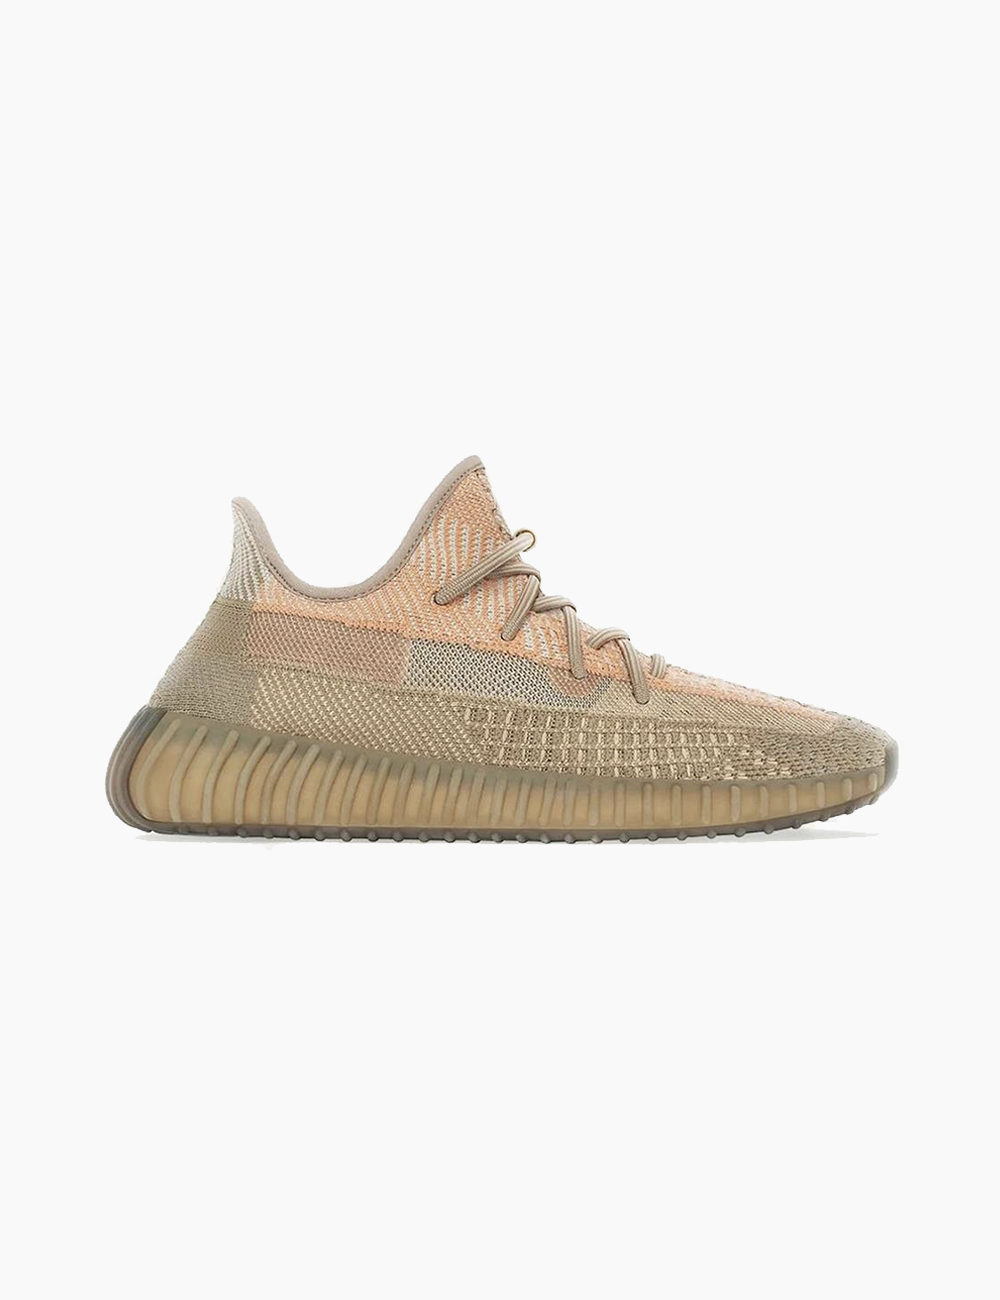 yeezy sand taupe release date